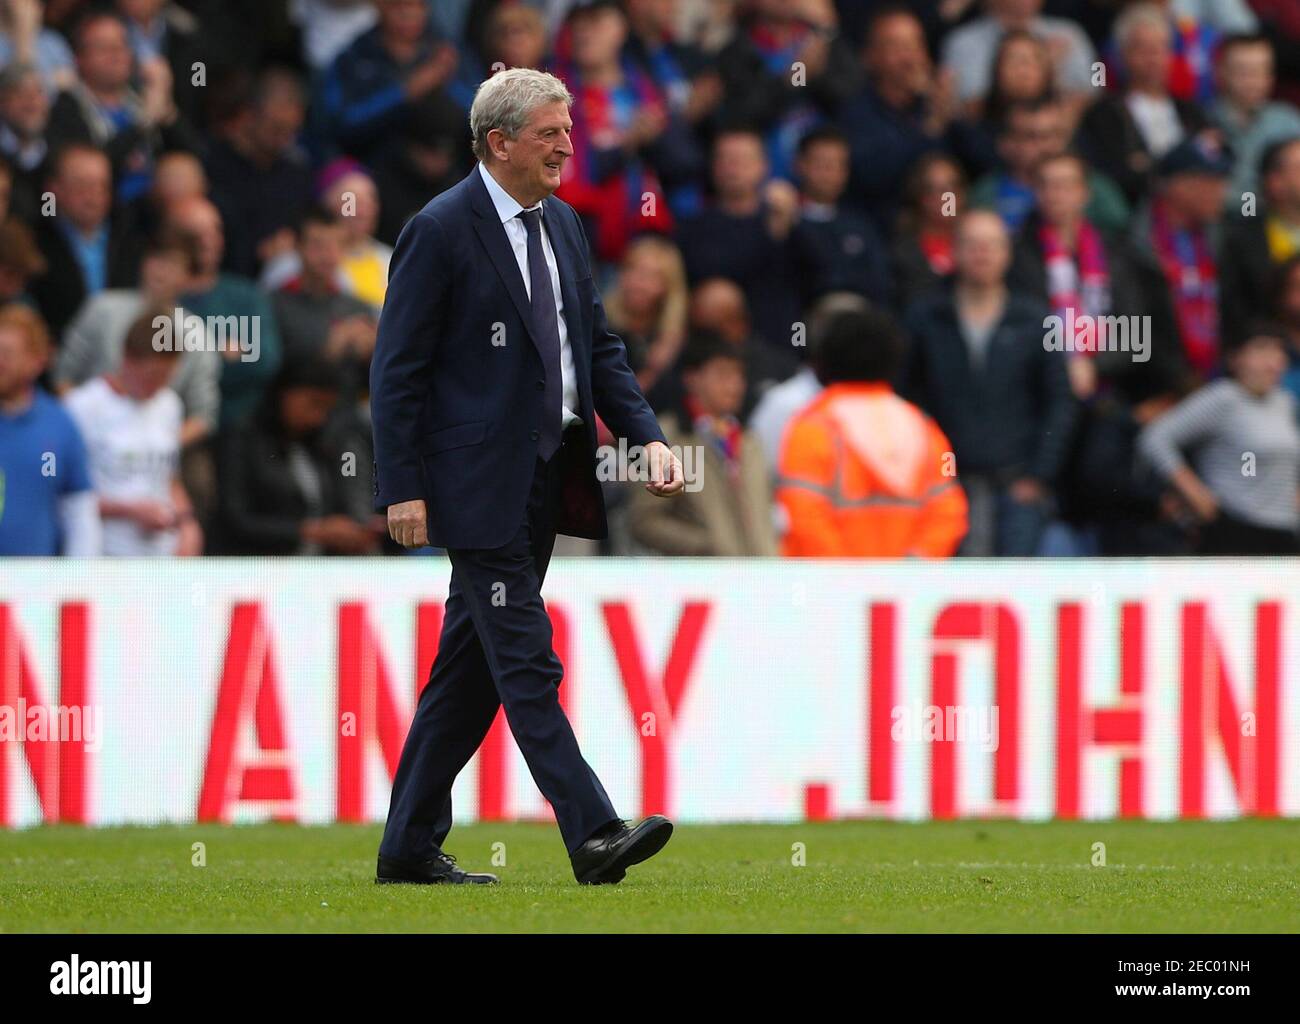 Soccer Football - Premier League - Crystal Palace vs West Bromwich Albion - Selhurst Park, London, Britain - May 13, 2018   Crystal Palace manager Roy Hodgson after the match   REUTERS/Hannah McKay    EDITORIAL USE ONLY. No use with unauthorized audio, video, data, fixture lists, club/league logos or 'live' services. Online in-match use limited to 75 images, no video emulation. No use in betting, games or single club/league/player publications.  Please contact your account representative for further details. Stock Photo